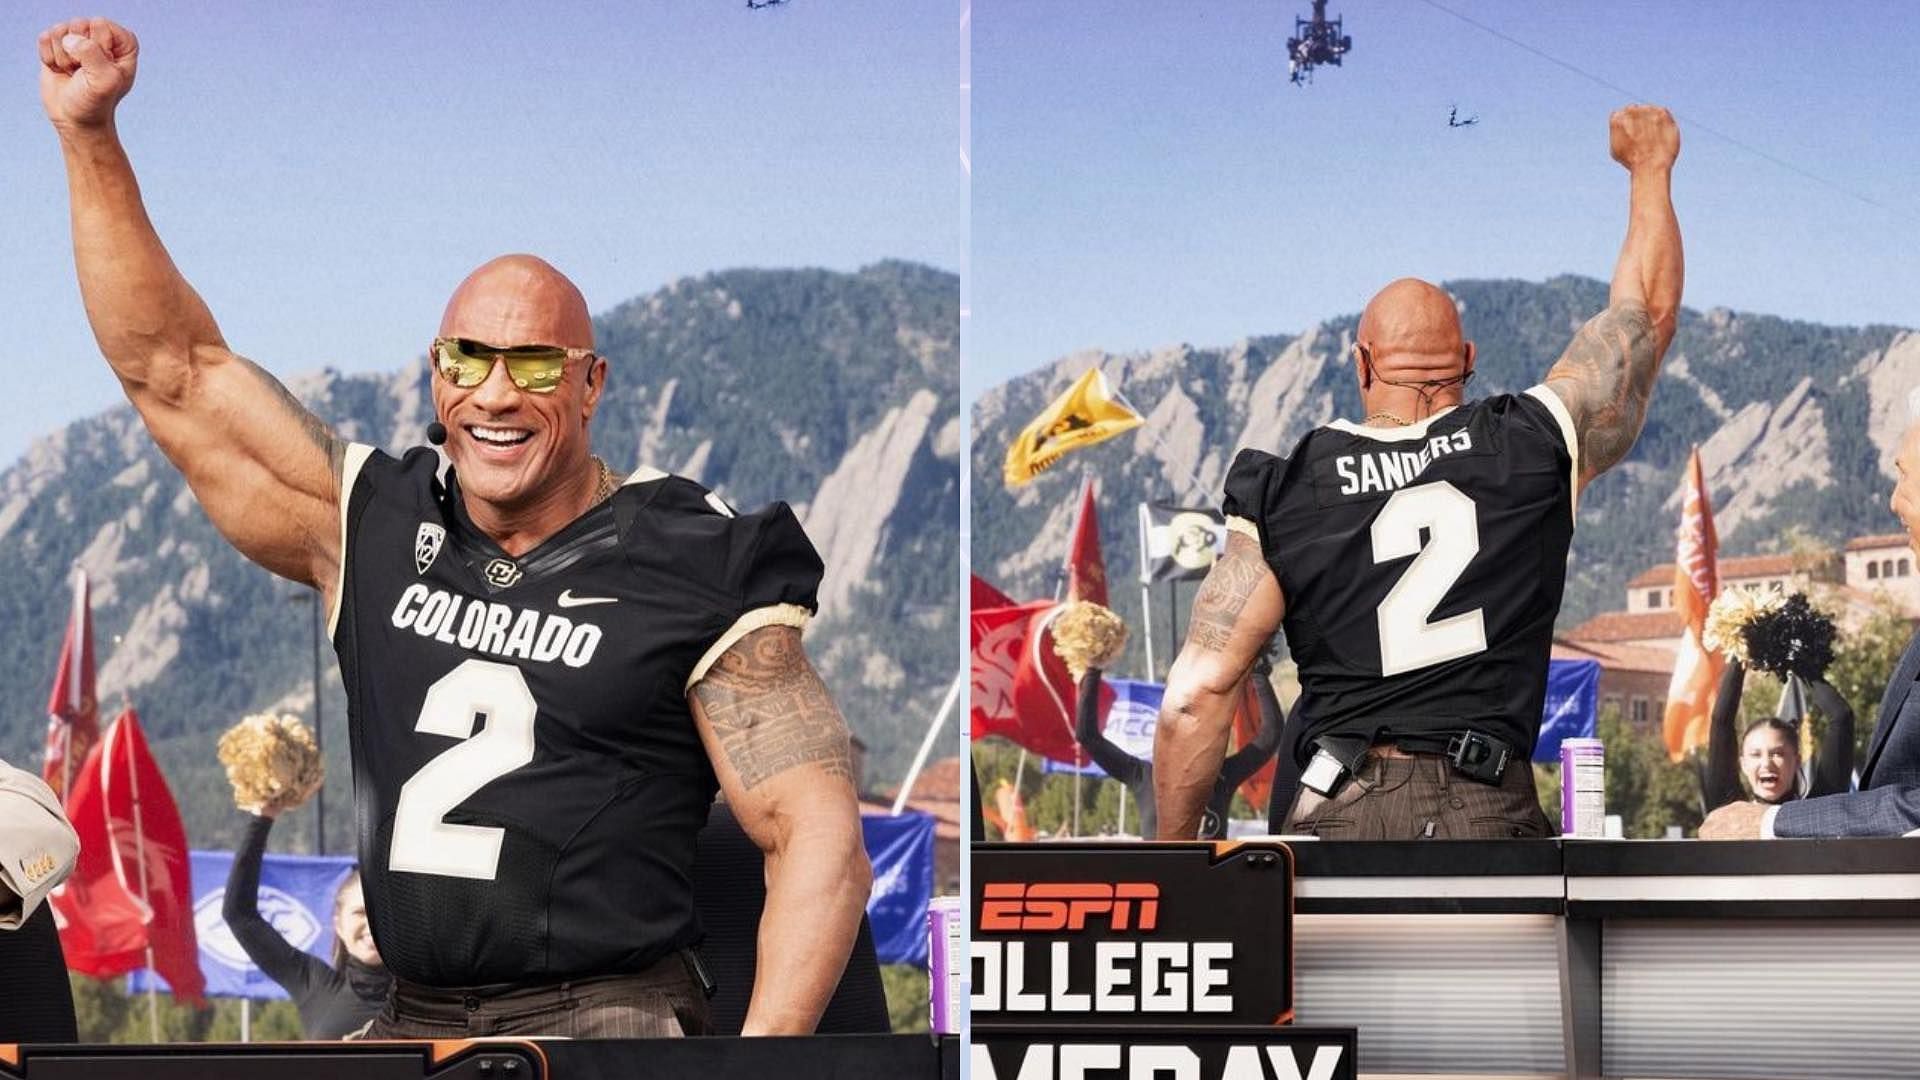 The Rock as seen during a college football event.